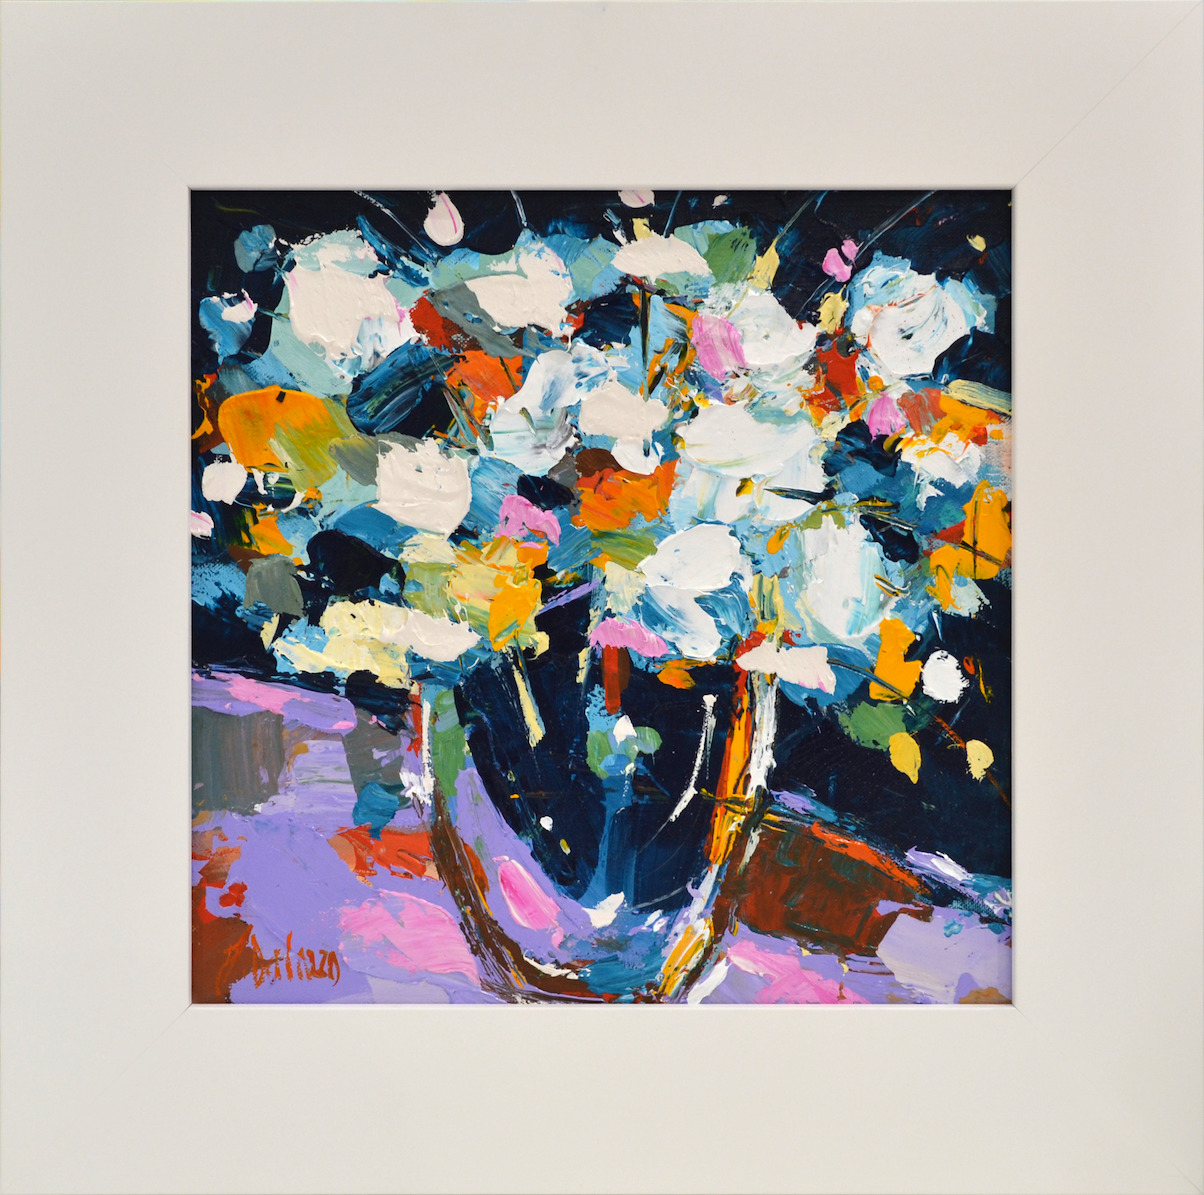 Framed Front View Of Still Life Painting "Emerald Bouquet" By Judith Dalozzo